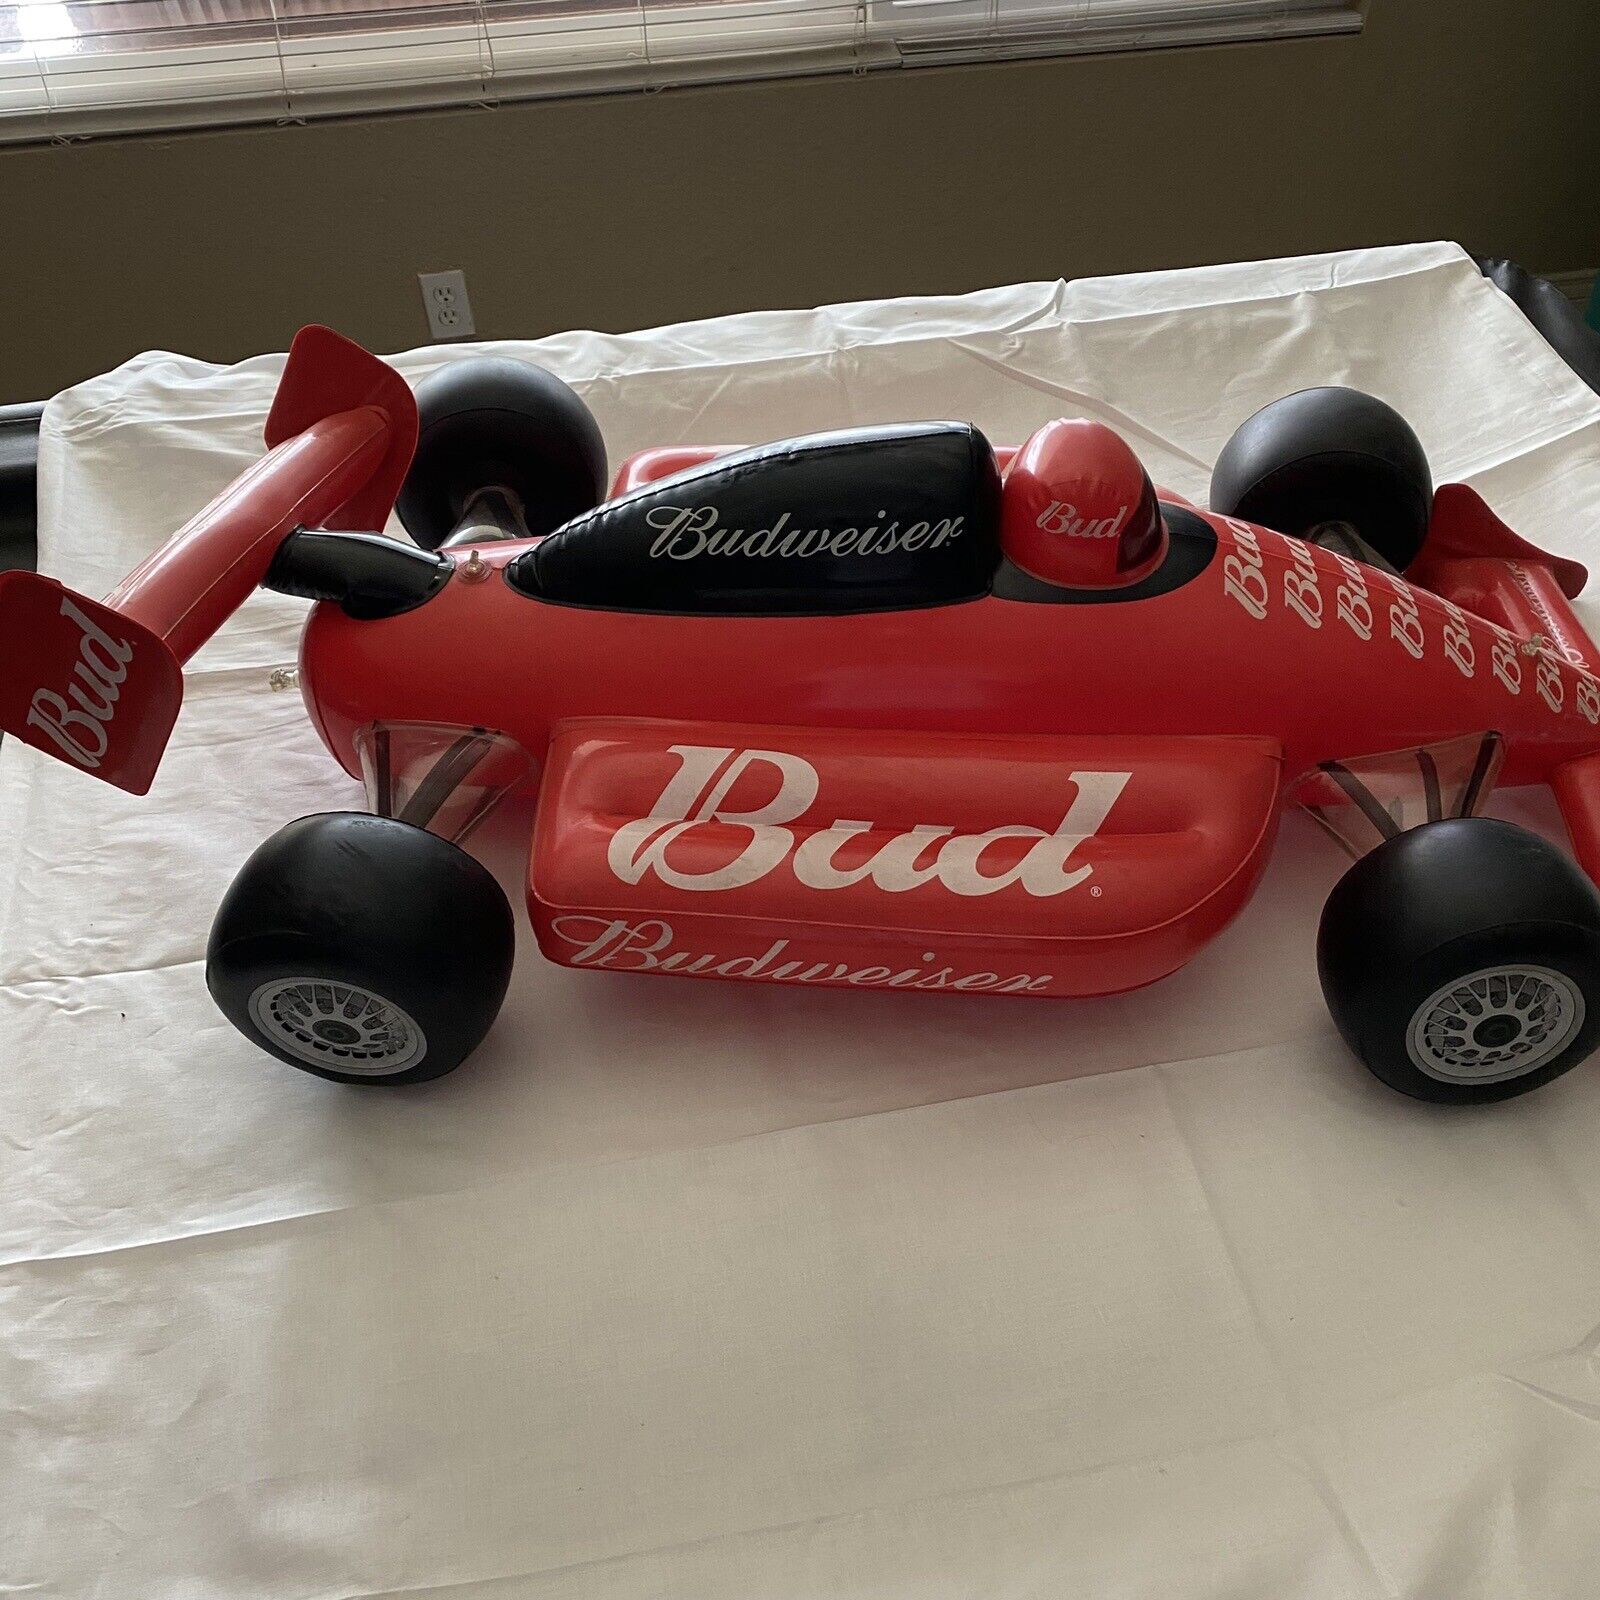 Anheuser Busch Budweiser Beer Blow-Up Indy Race Car 2001 42 Inches Long